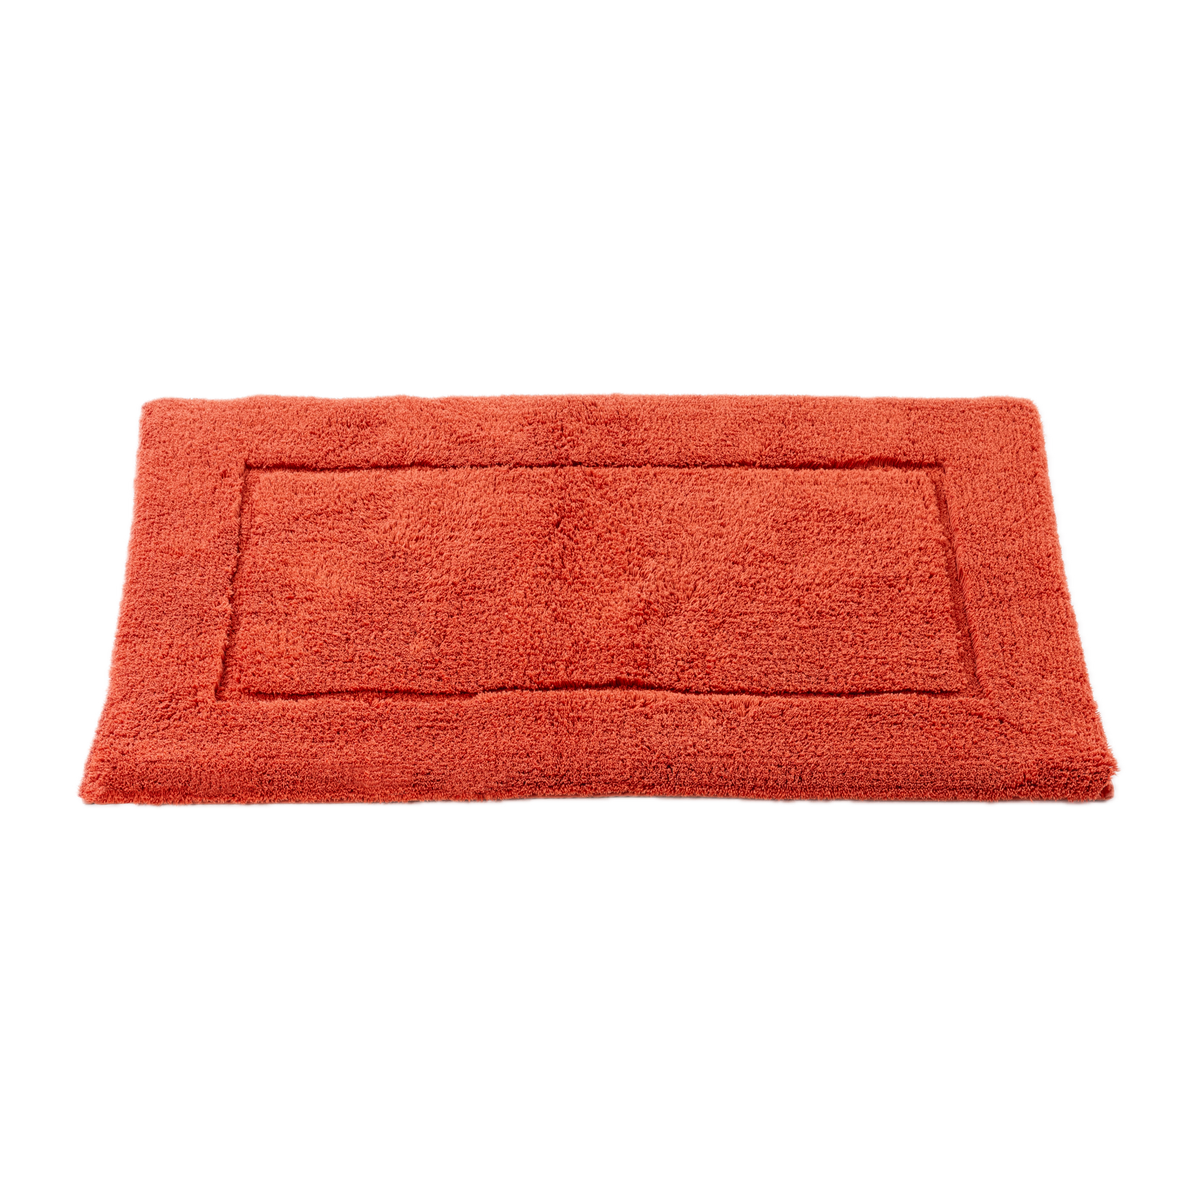 Tilted View of Abyss Habidecor Must Bath Rug in Chili Color